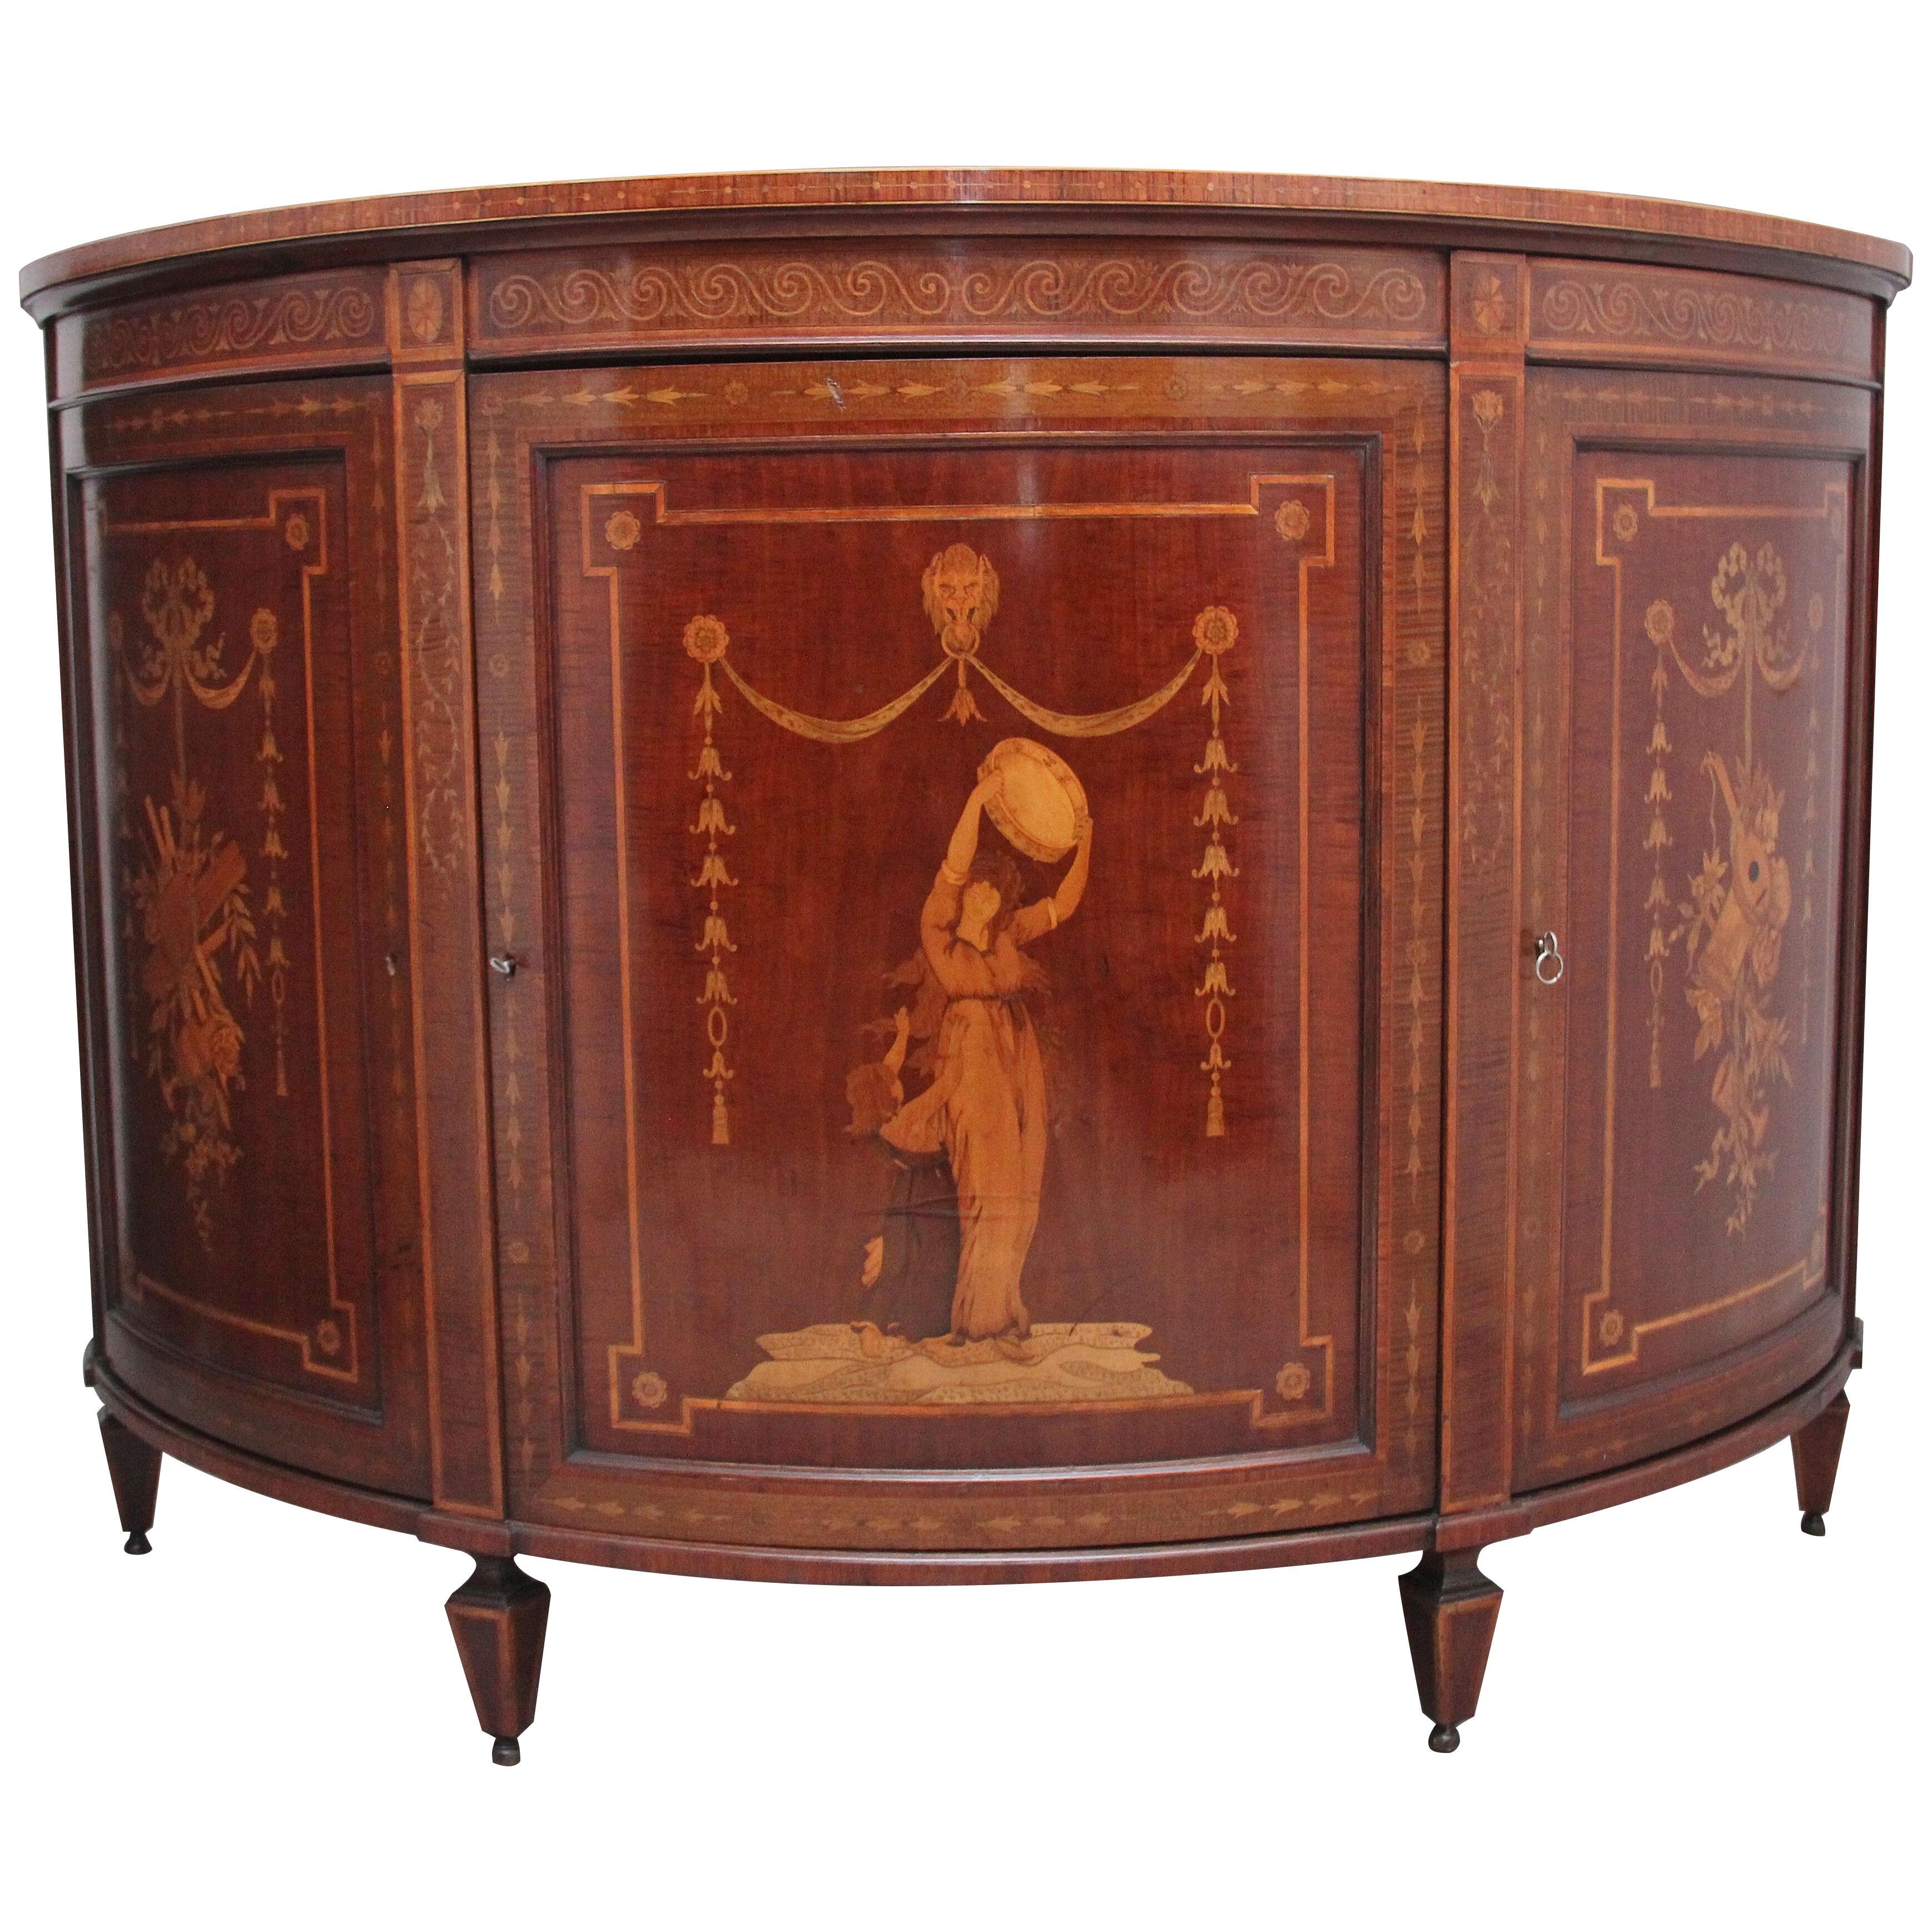 Fabulous quality 19th Century mahogany and inlaid cabinet